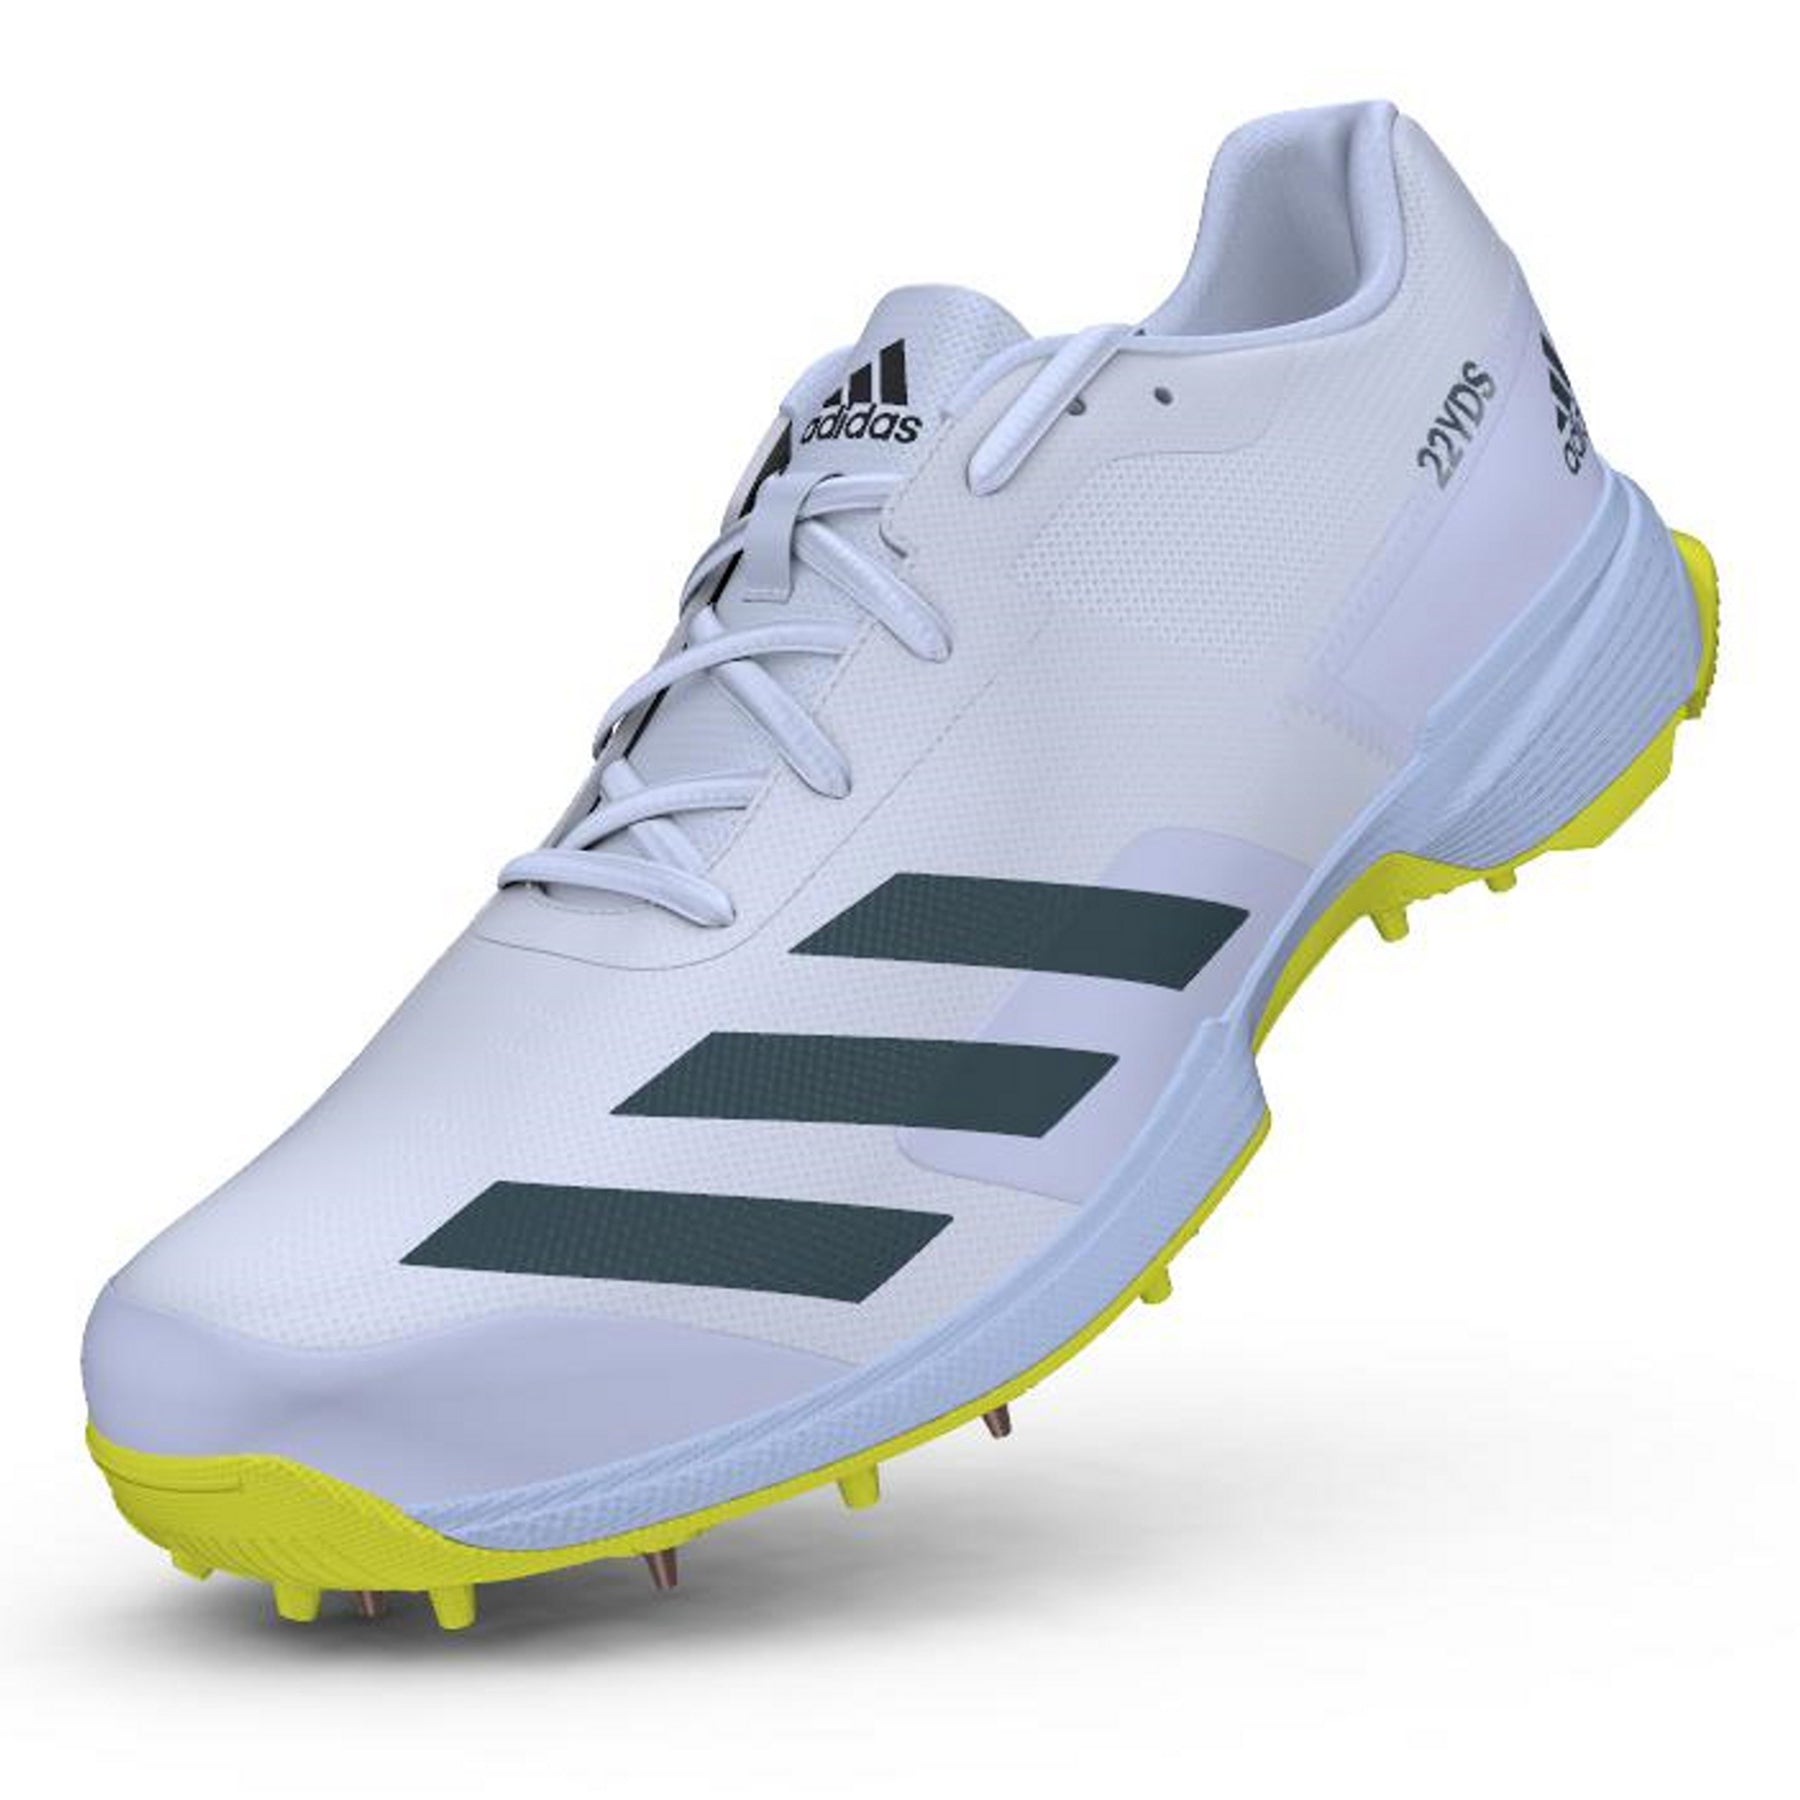 Adidas 22YDS Spike Adult Cricket Shoes